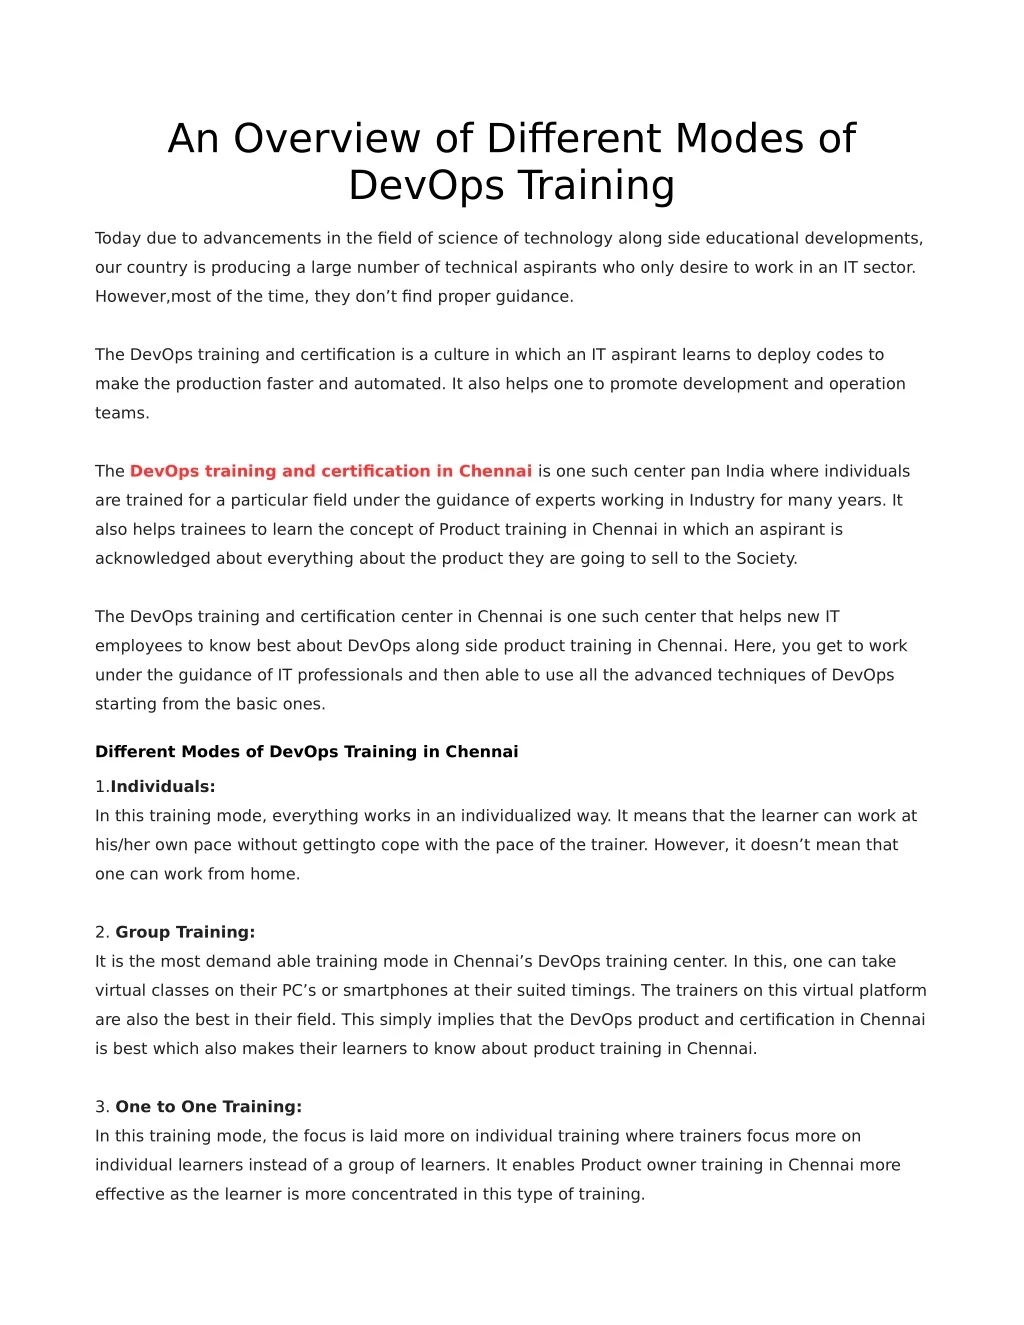 an overview of different modes of devops training